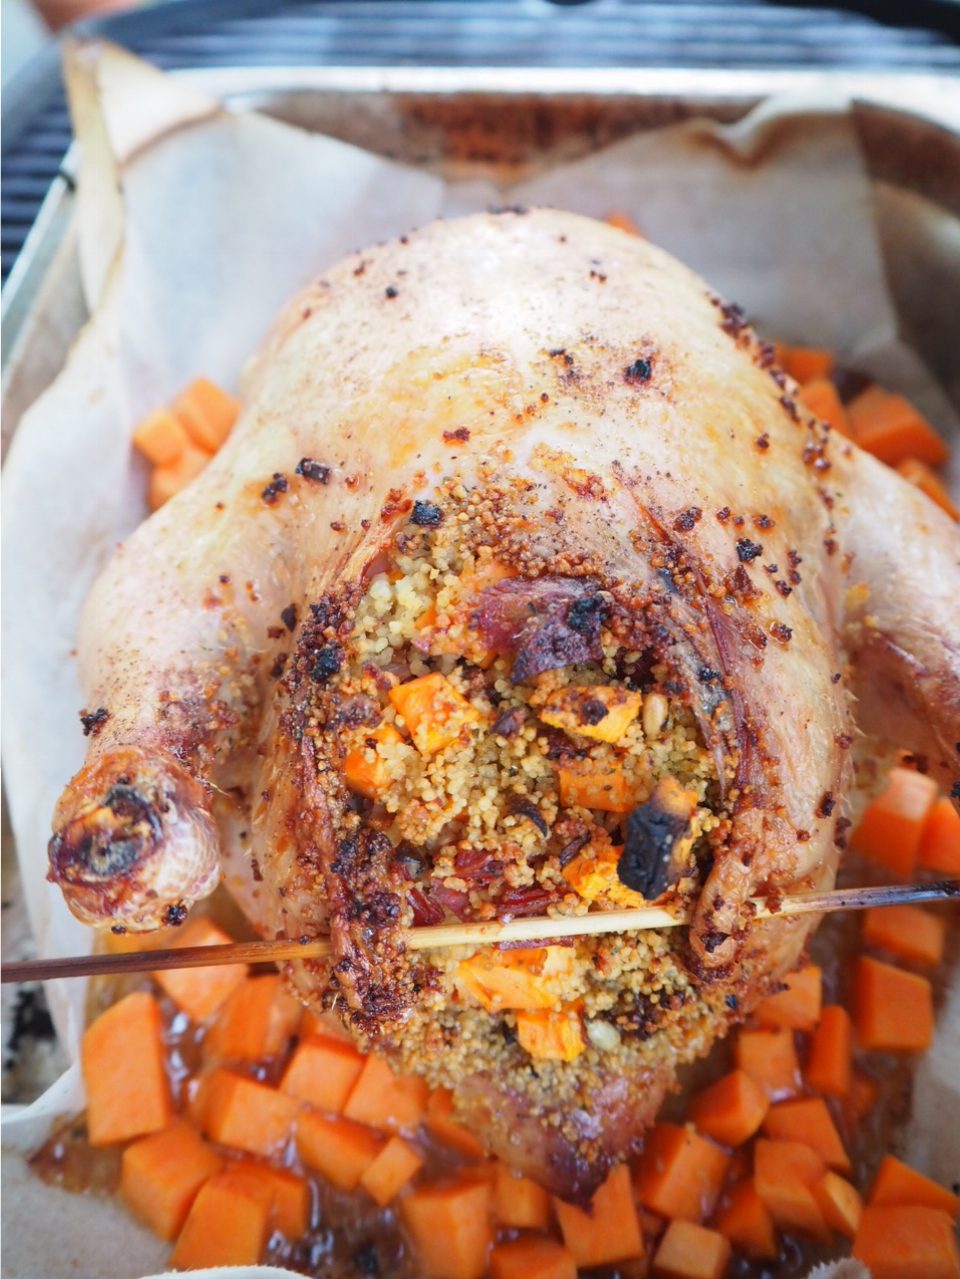 How to cook your side dish inside your roast chicken